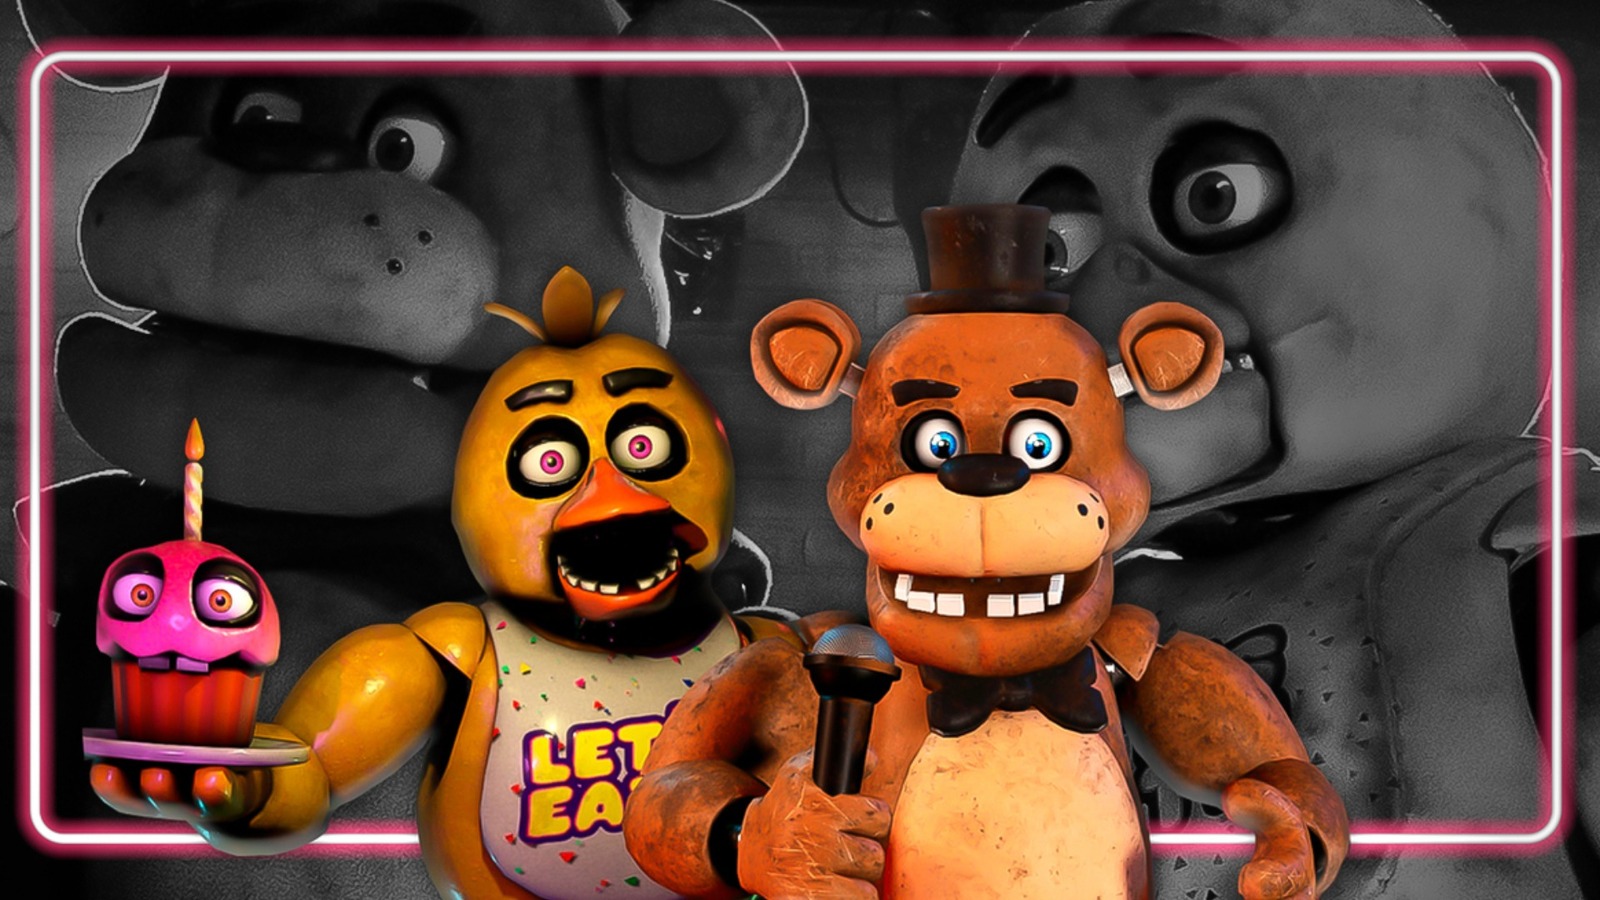 Every Animatronic In The Five Nights At Freddy's Movie